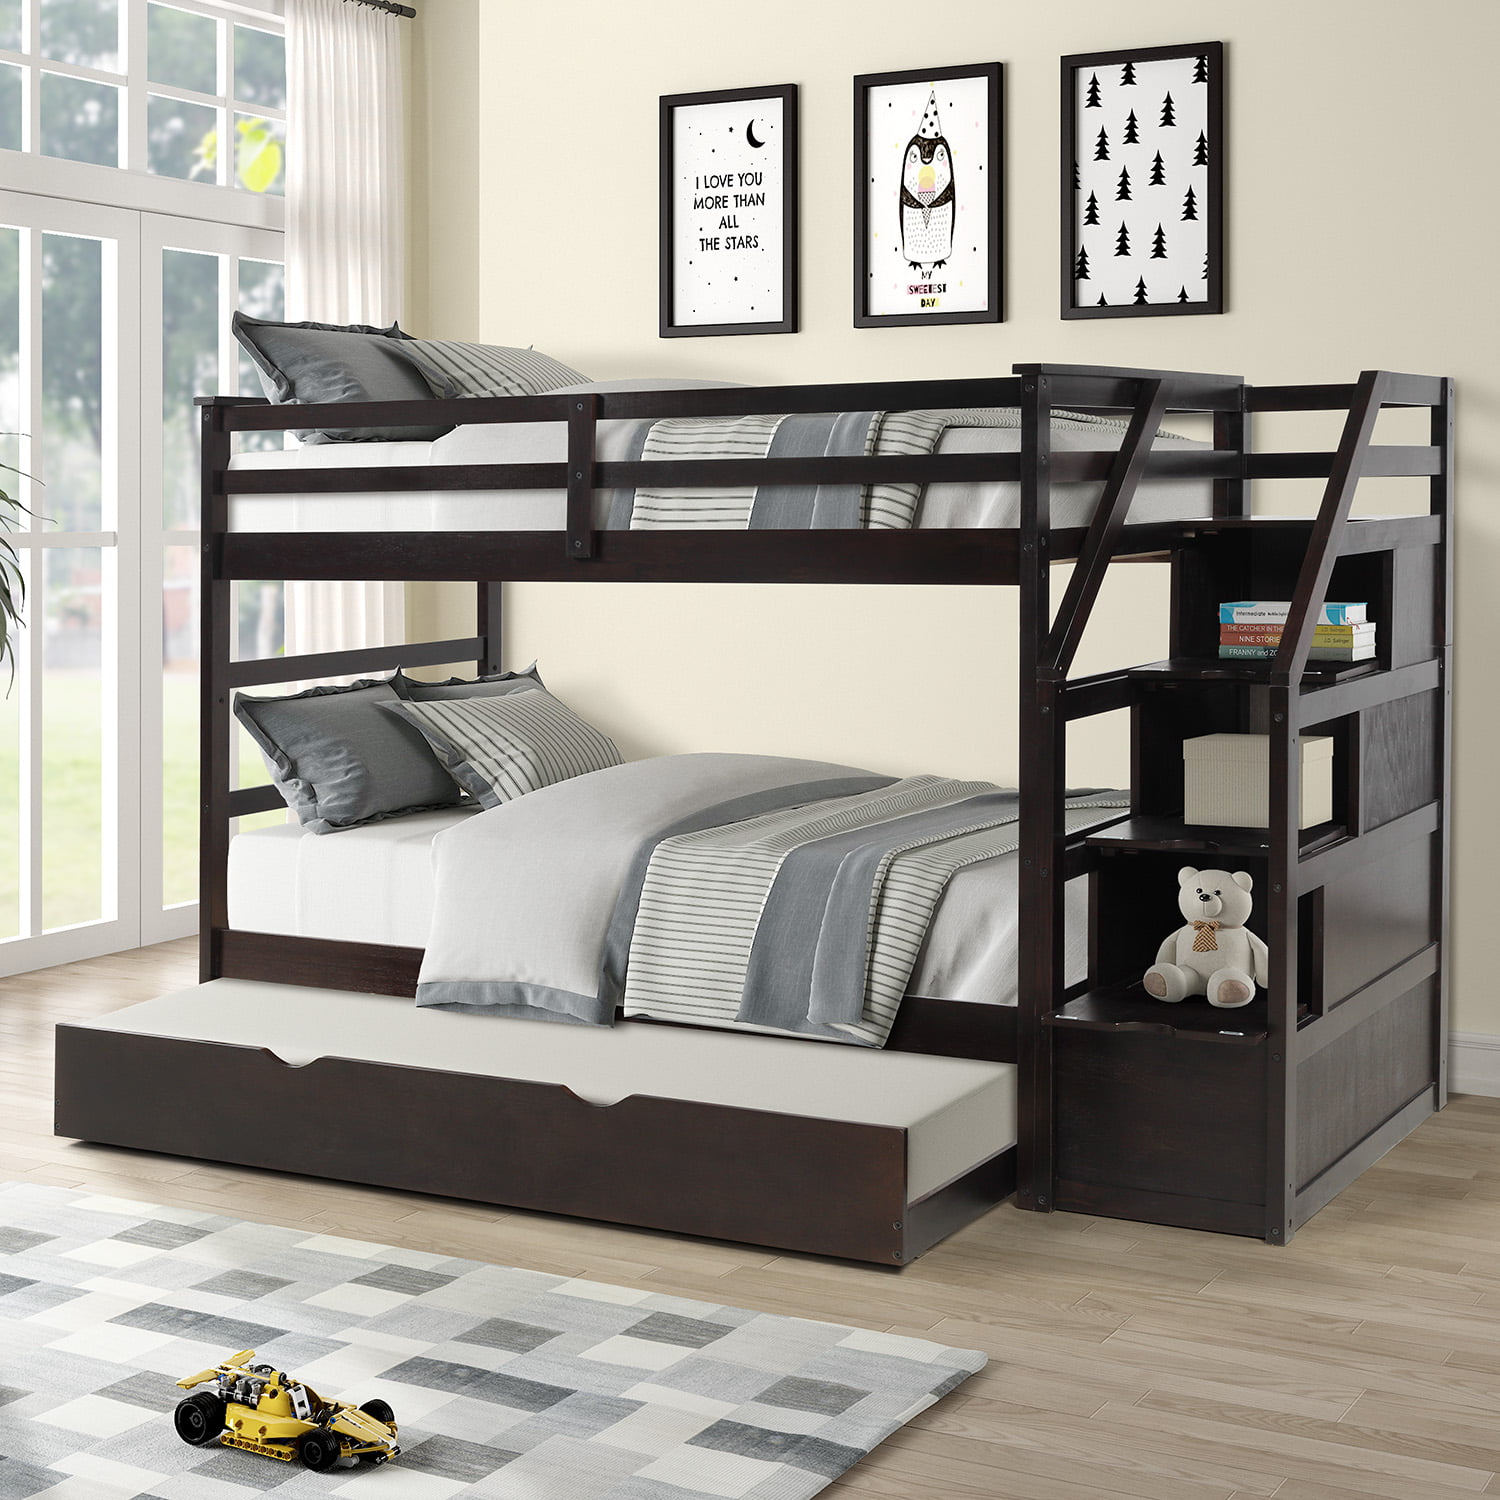 Stairway Twin Over Bunk Bed With, Twin Over Stairway Storage Bunk Bed With Trundle